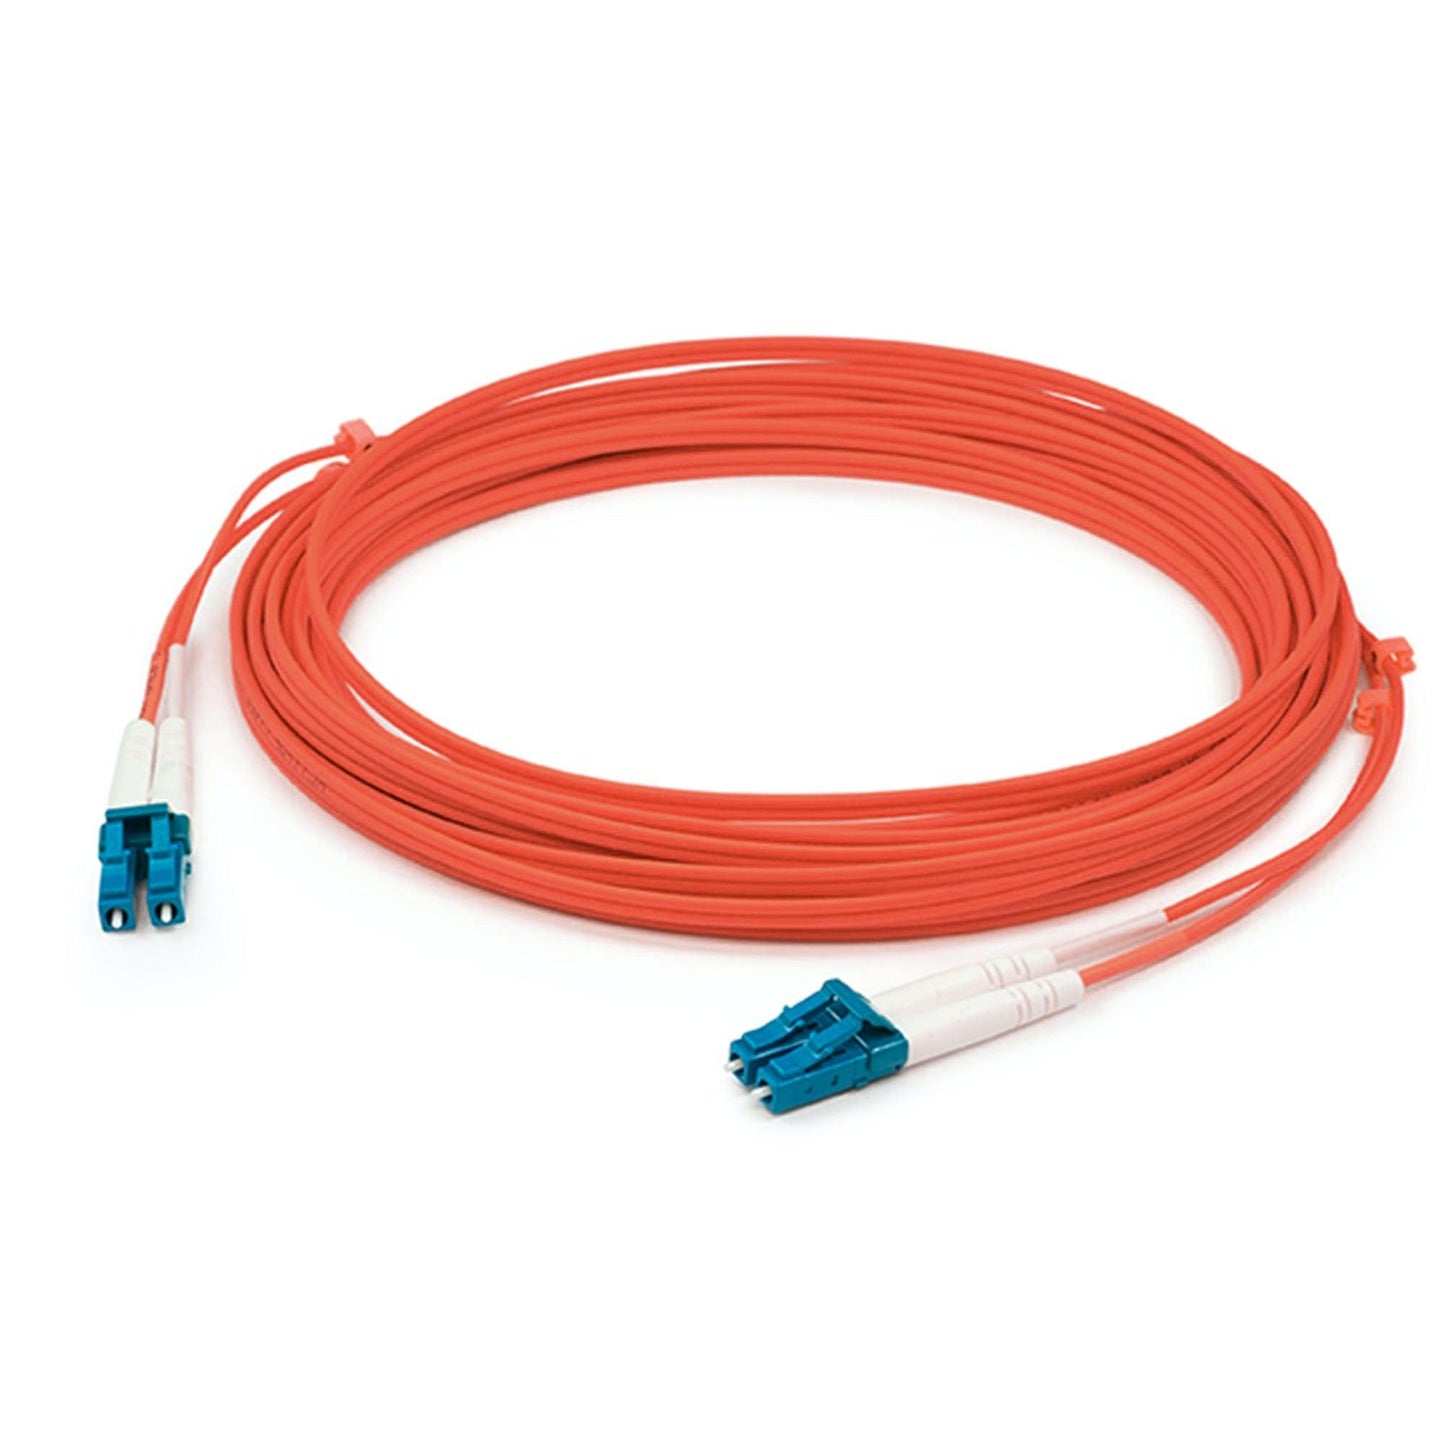 Addon Networks Add-Lclc-Ubp2M9P-Rd-Ll Fibre Optic Cable 2 M Lc Red